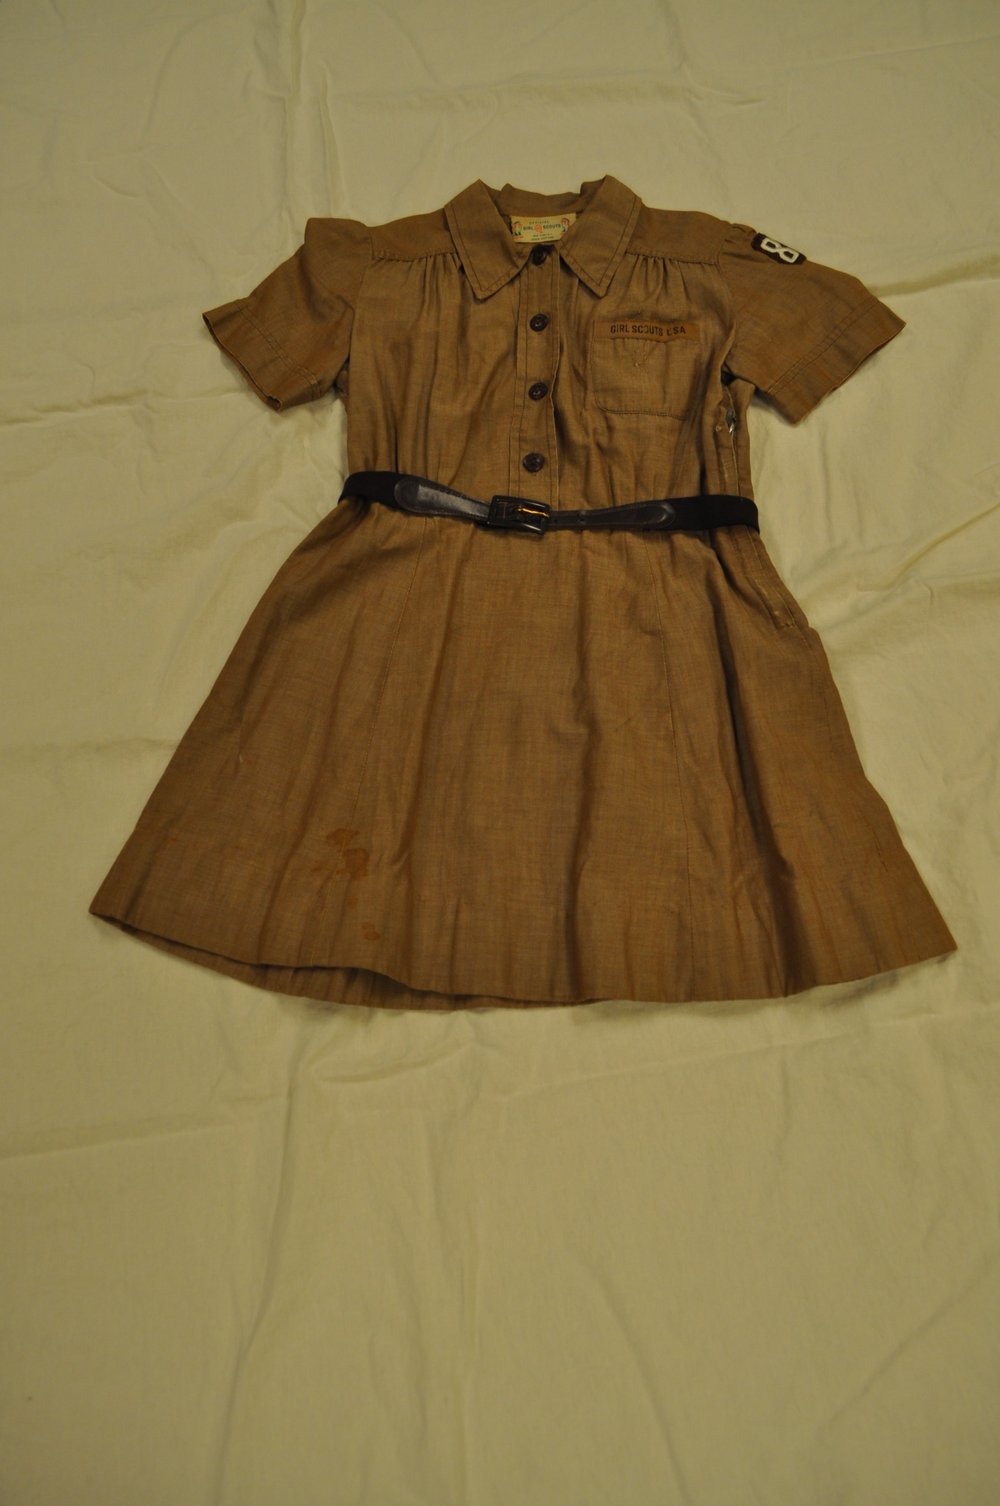 Figure 7: 1950s Brownie Uniform worn by a member of the Nauman family